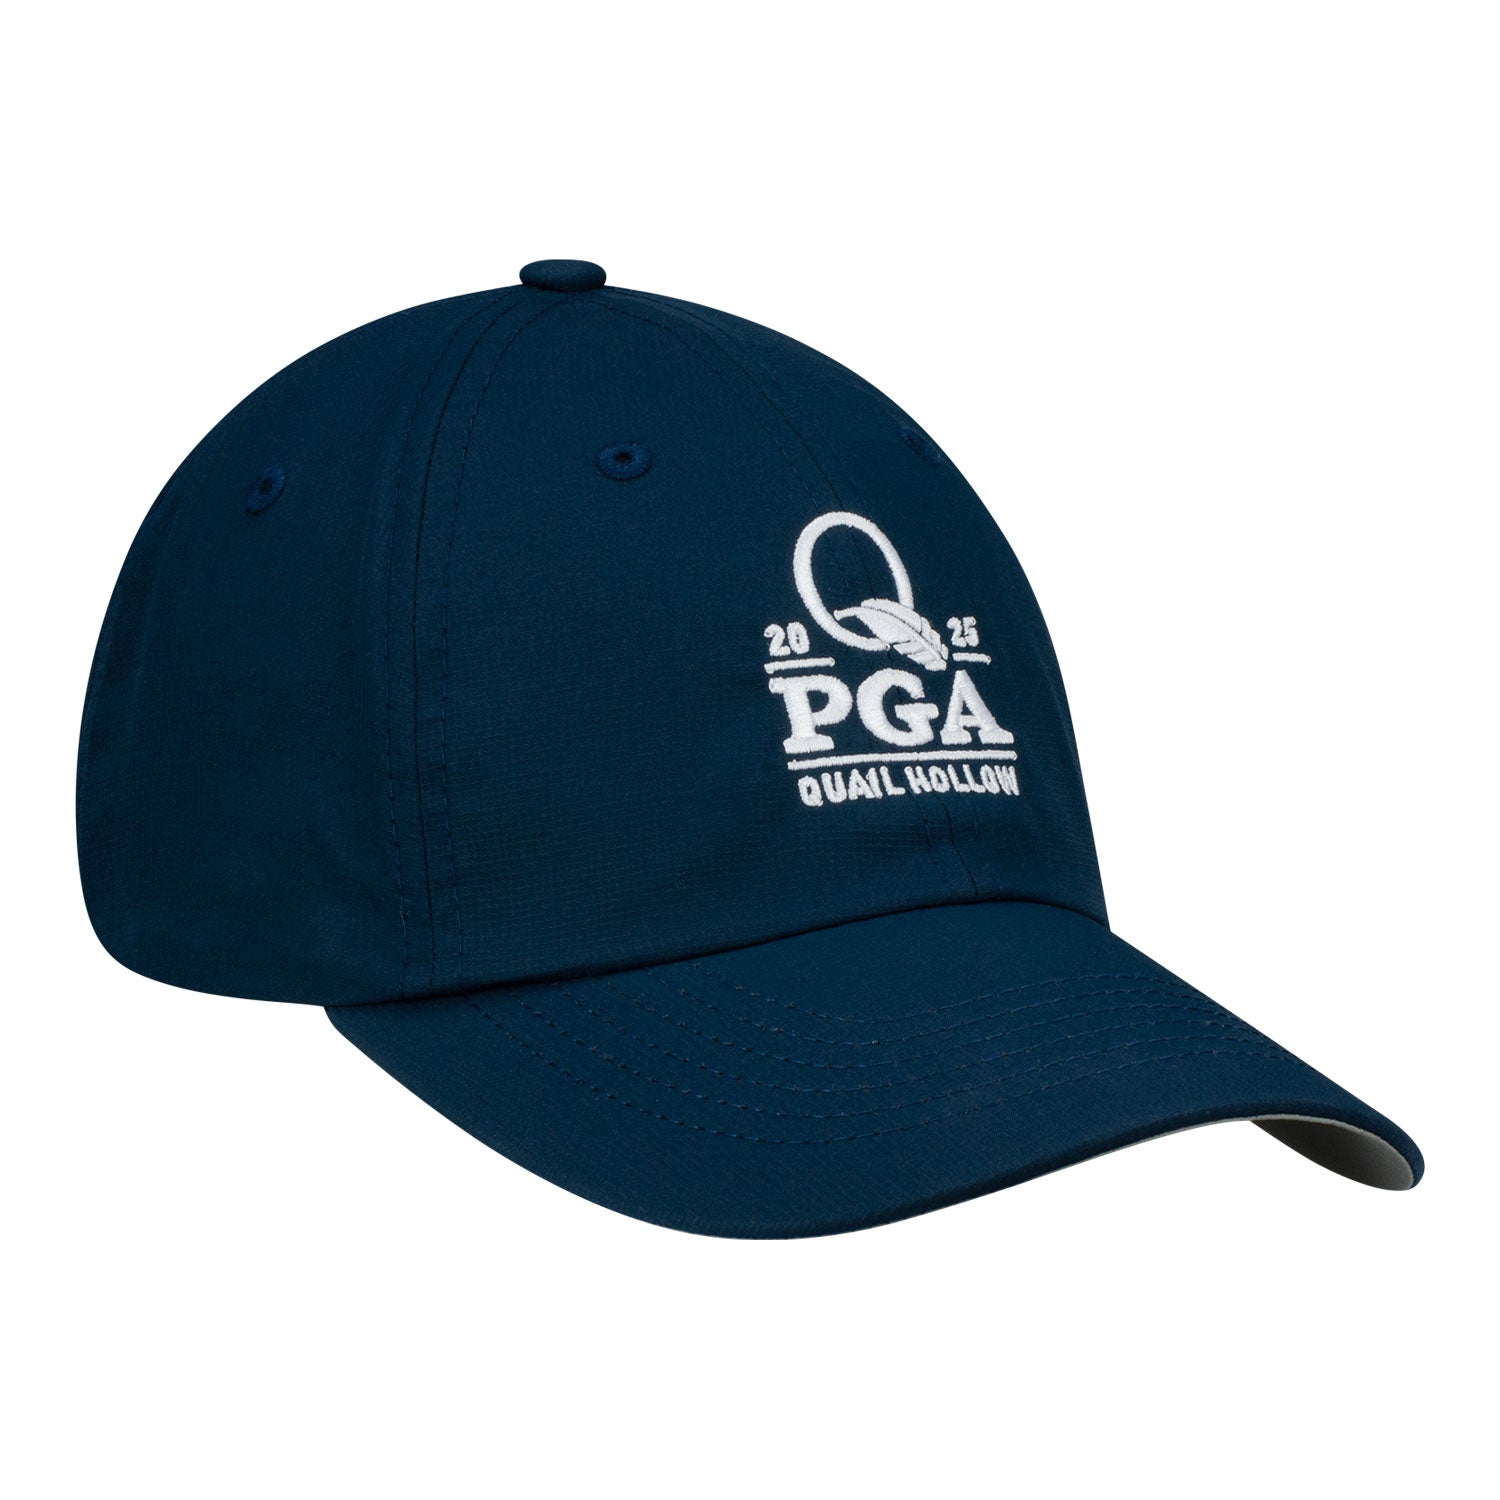 Imperial 2025 PGA Championship Original Performance Hat in Navy - Angled Front Left View